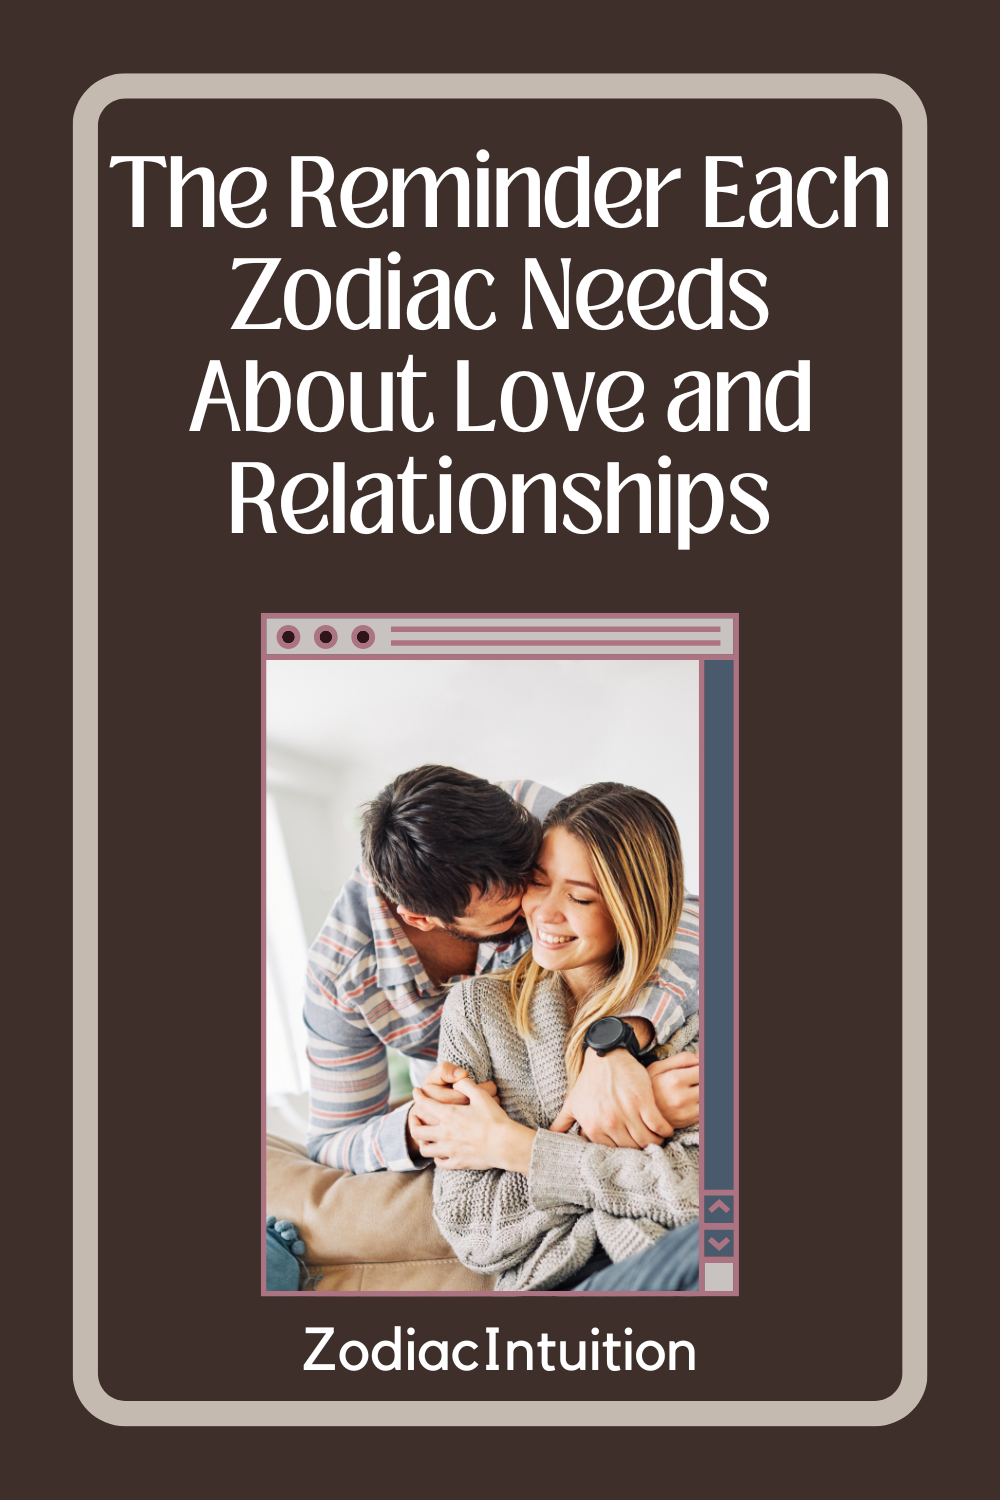 The Reminder Each Zodiac Needs About Love and Relationships